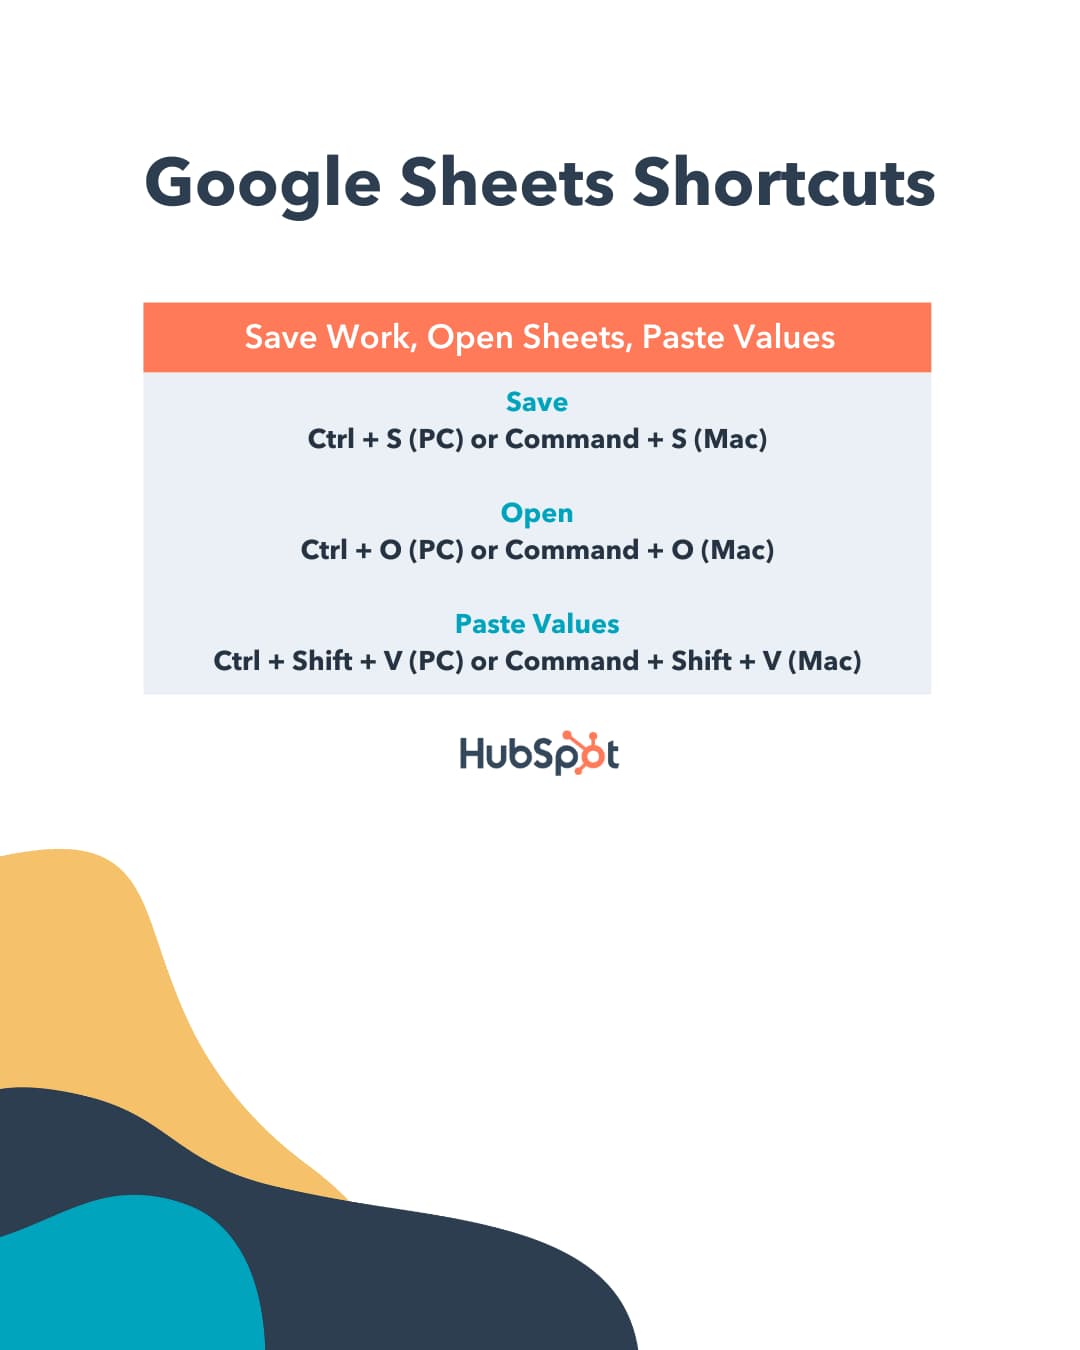 Use Google Spreadsheets shortcuts to save work, open worksheets, and paste values